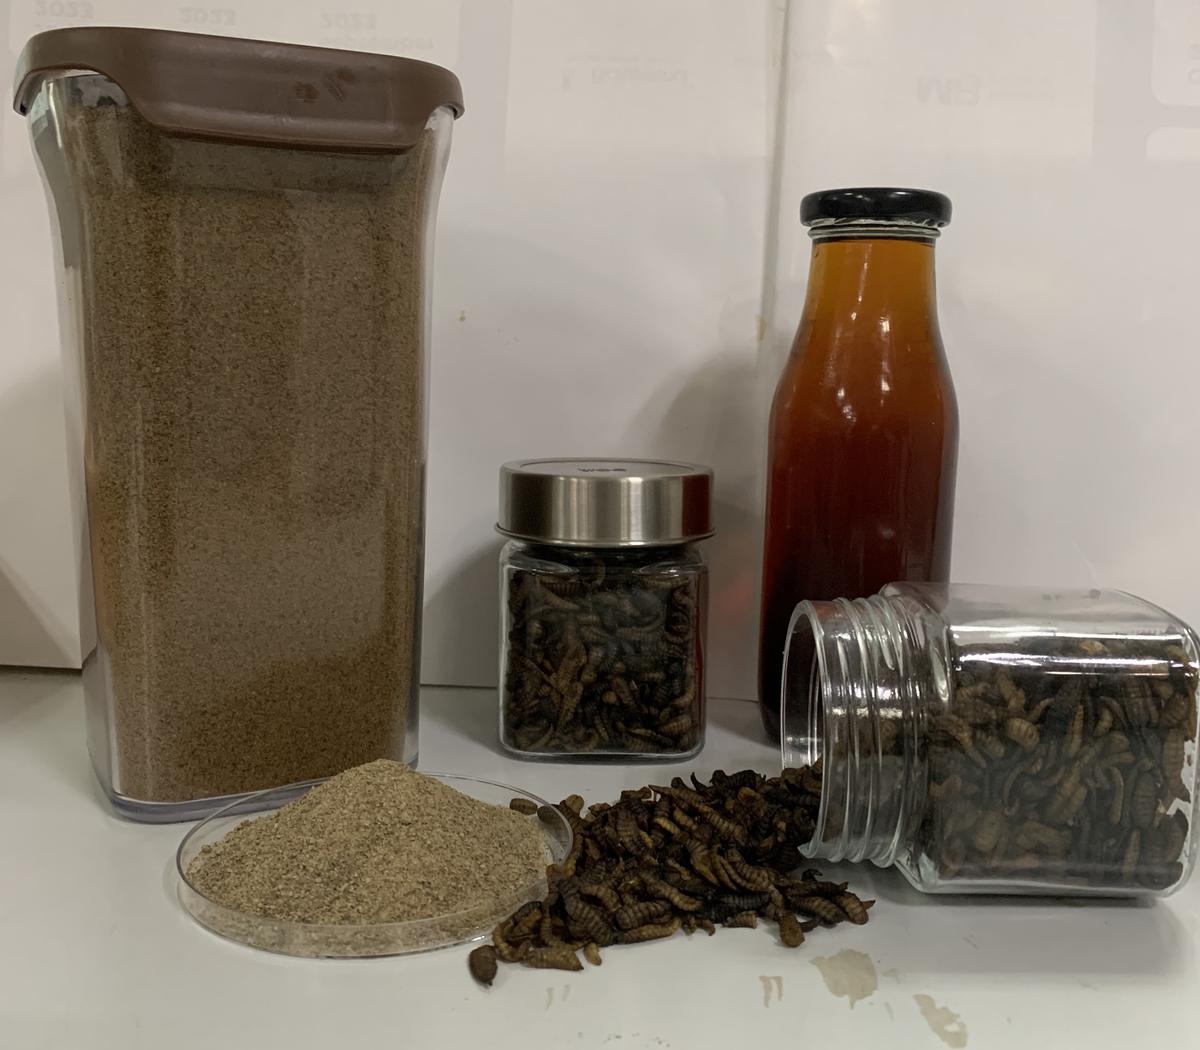  Dried insects and protein concentrate.